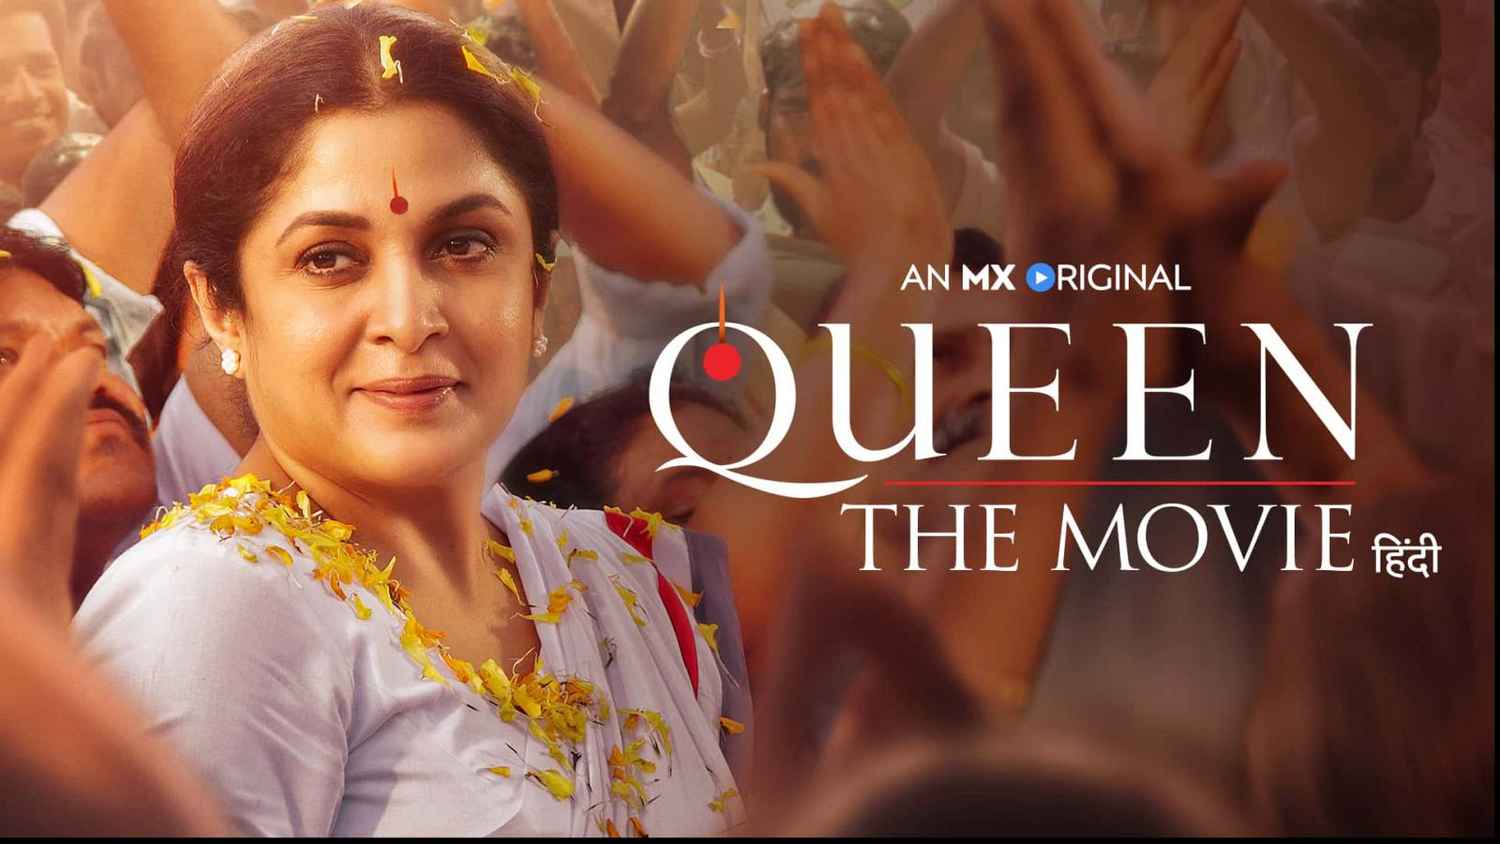 Queen (Hindi) - The Movie